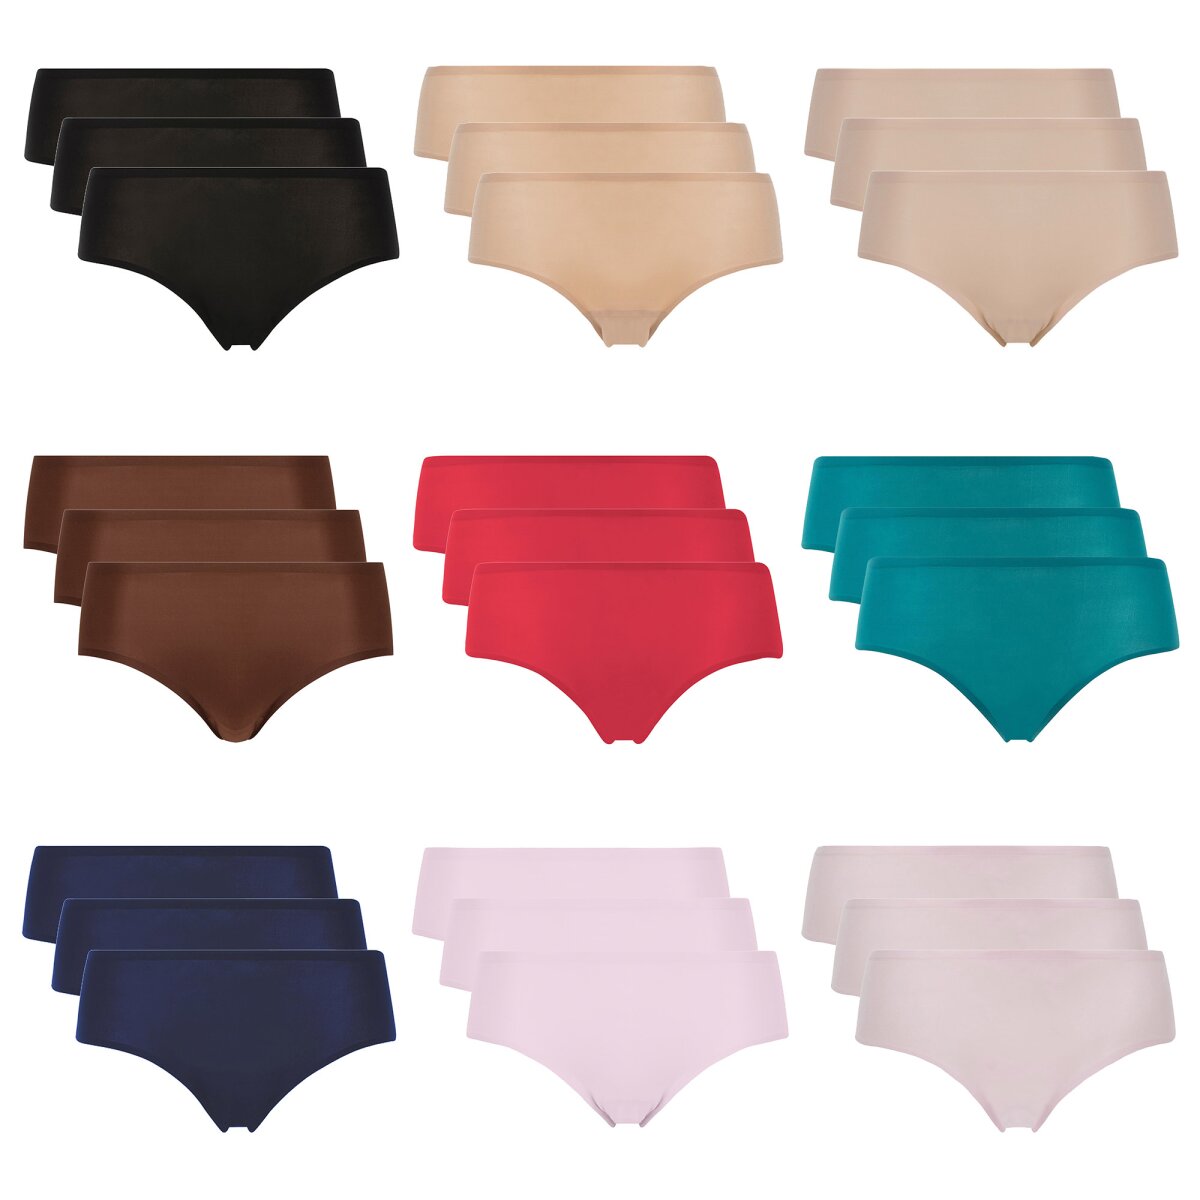 https://www.yourfashionplace.de/media/image/product/181473/lg/tb_c26440-3p_chantelle-damen-shorty-softstretch-seamless-invisible-one-size-36-44_1.jpg